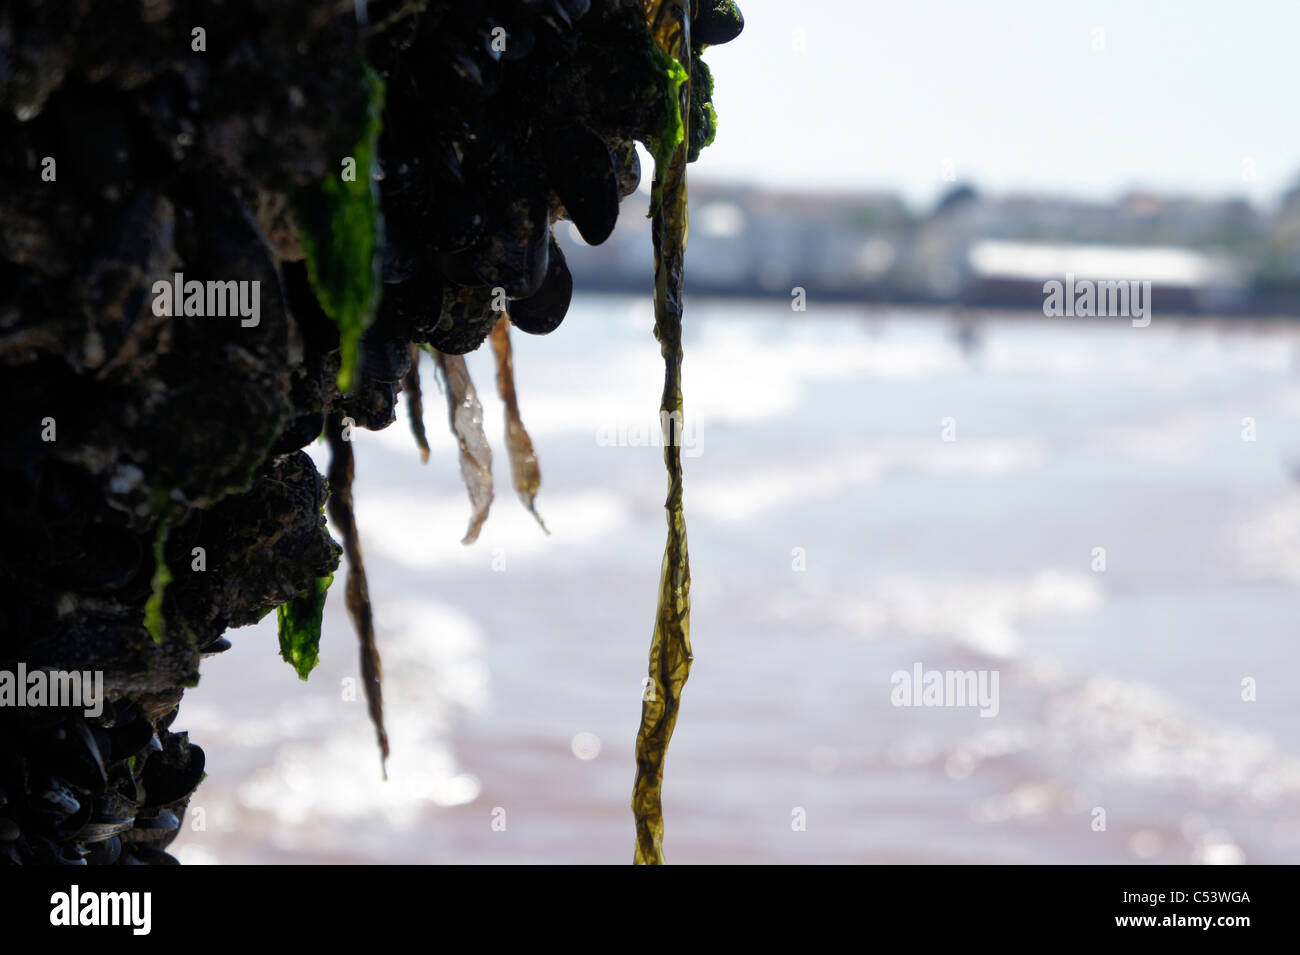 Sea Weed and crustacean stuck to a pier support on a beach Stock Photo